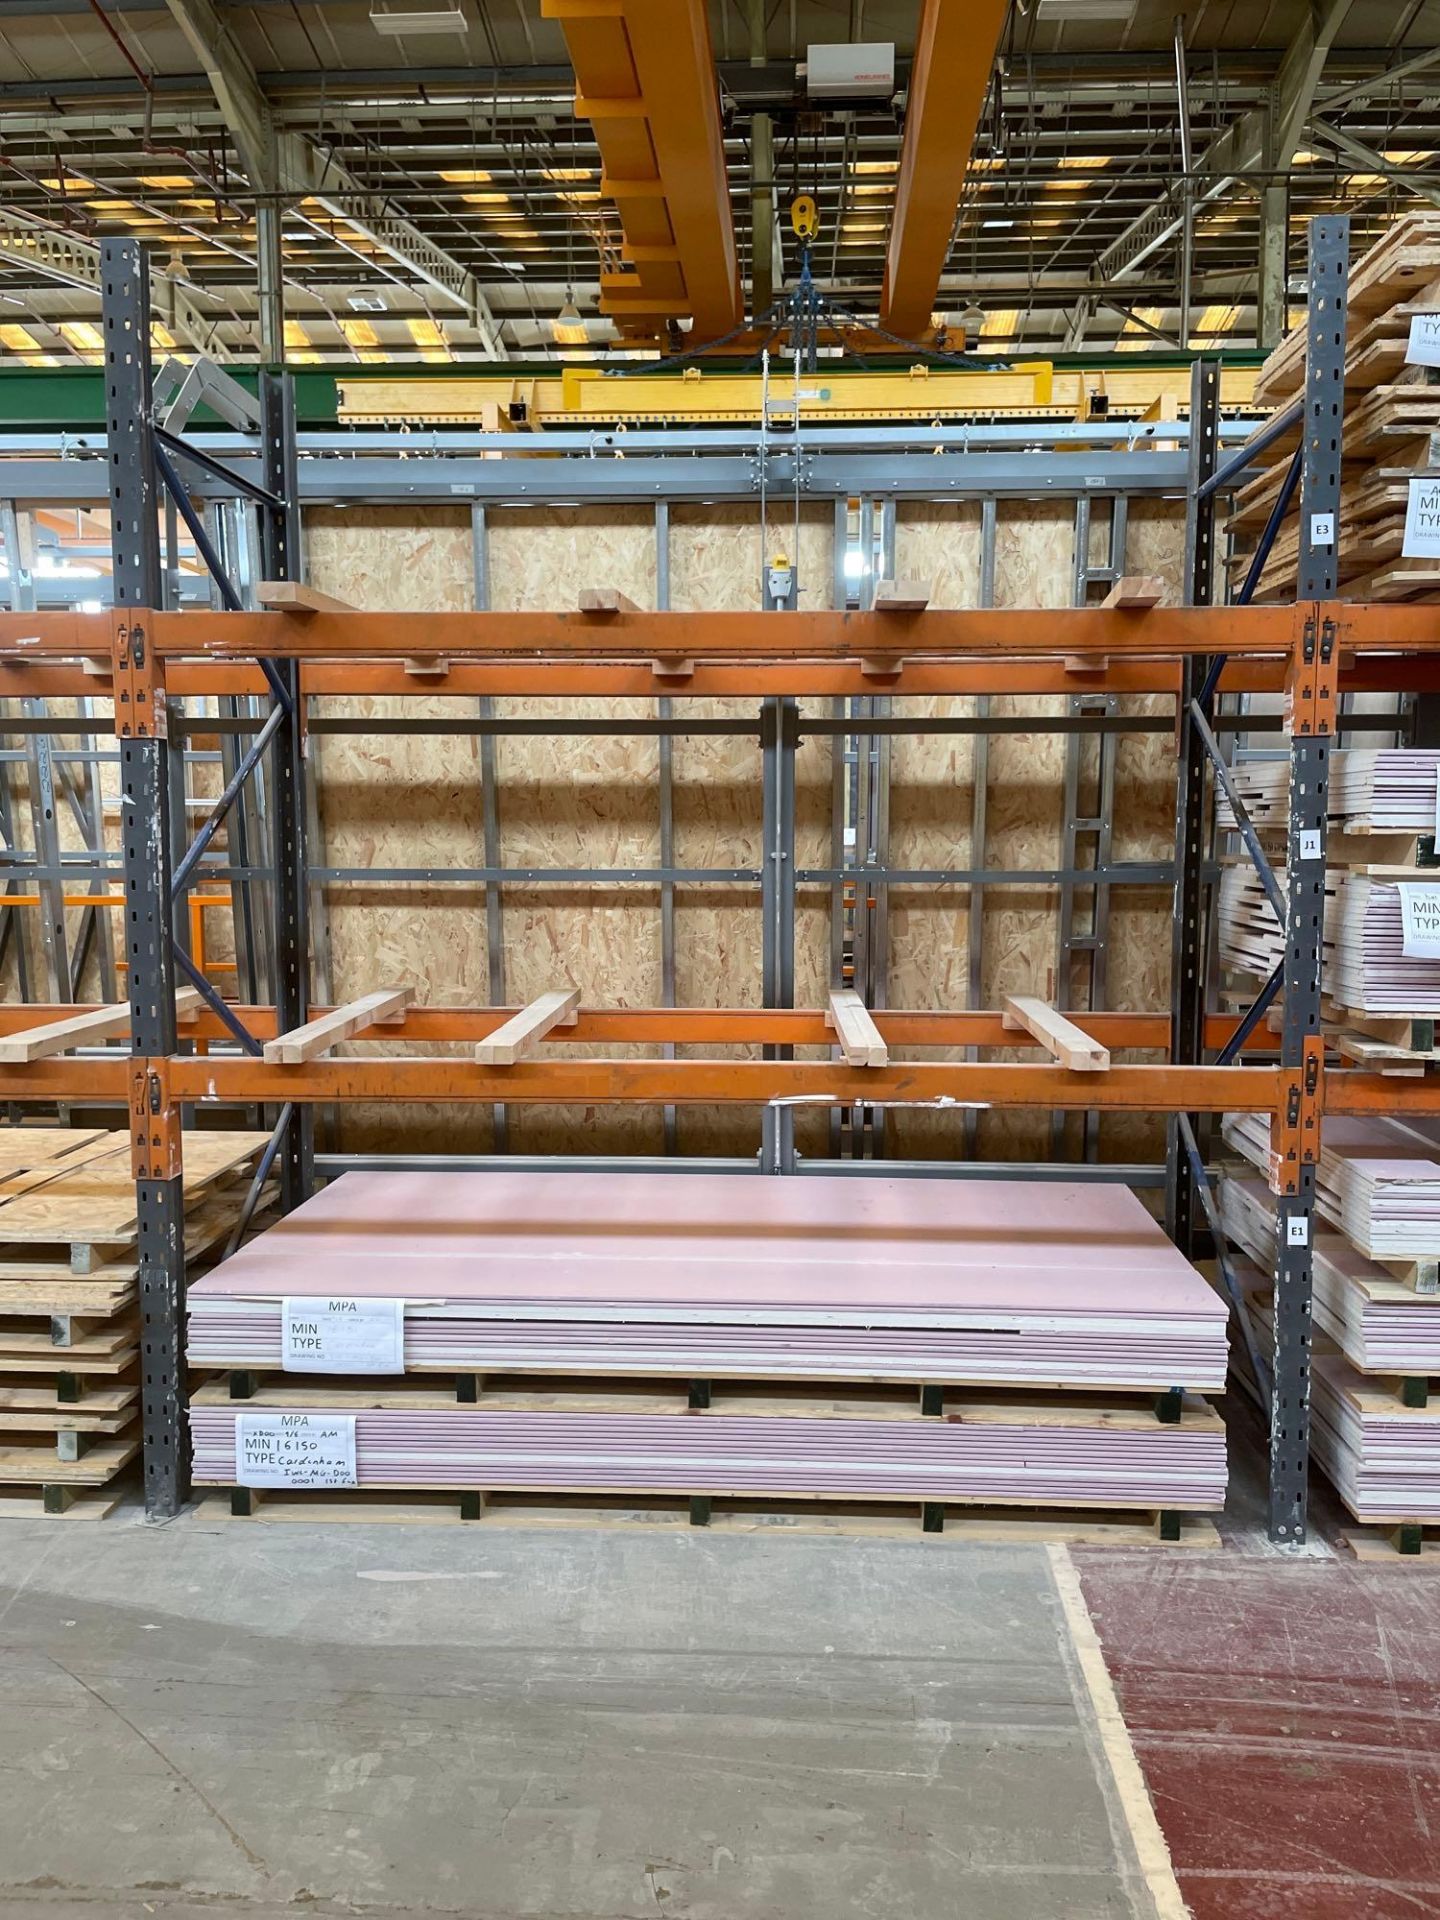 5 Bays of Slotted Steel Pallet Racking 3m x 2.7m - Image 3 of 6